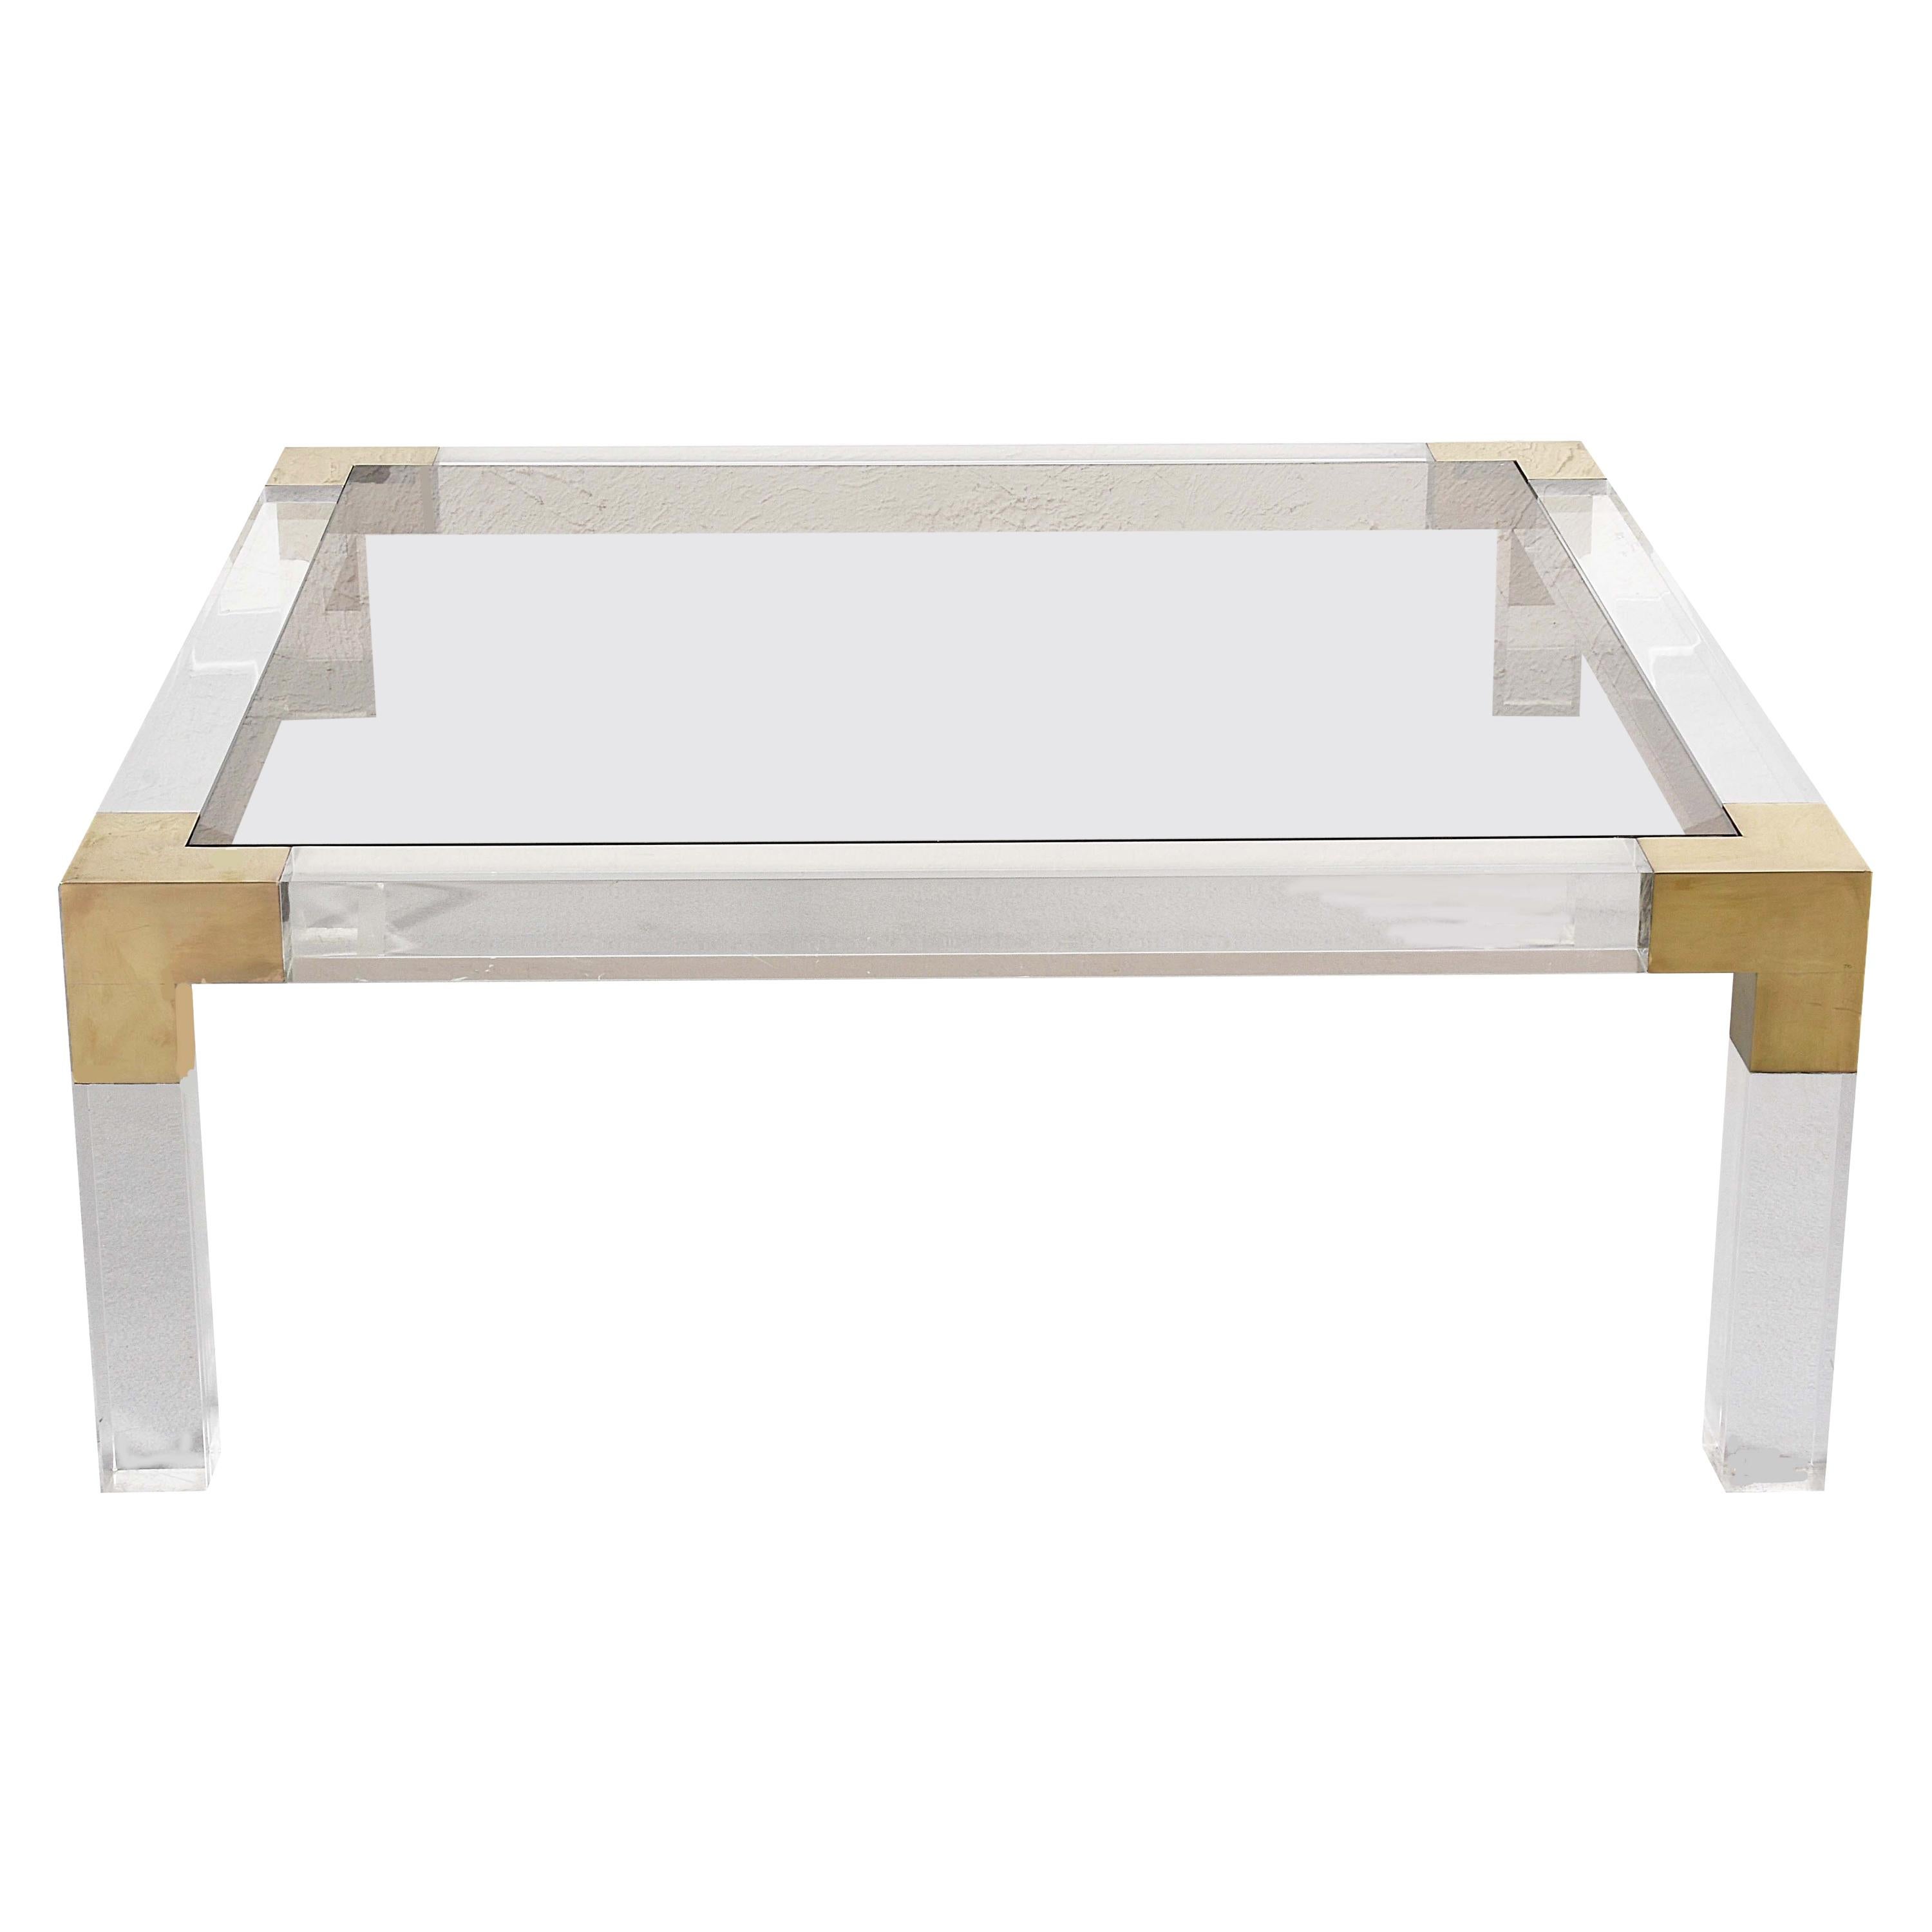 Midcentury Square Coffee Table in Brass and Lucite, Smoked Glass Top Italy 1970s